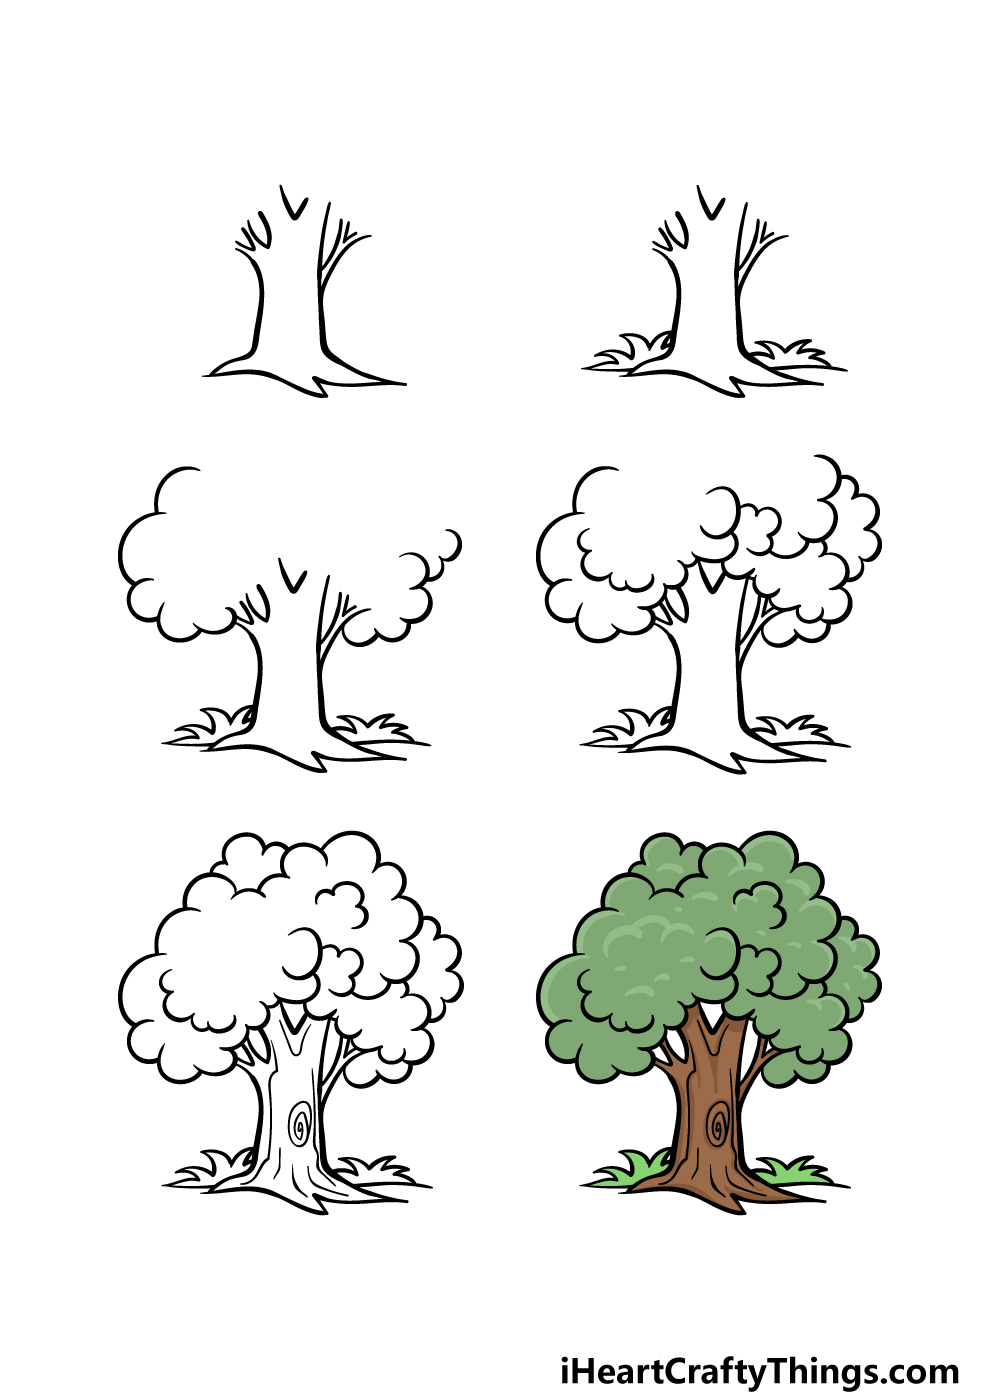 how to draw a cartoon tree in 6 steps